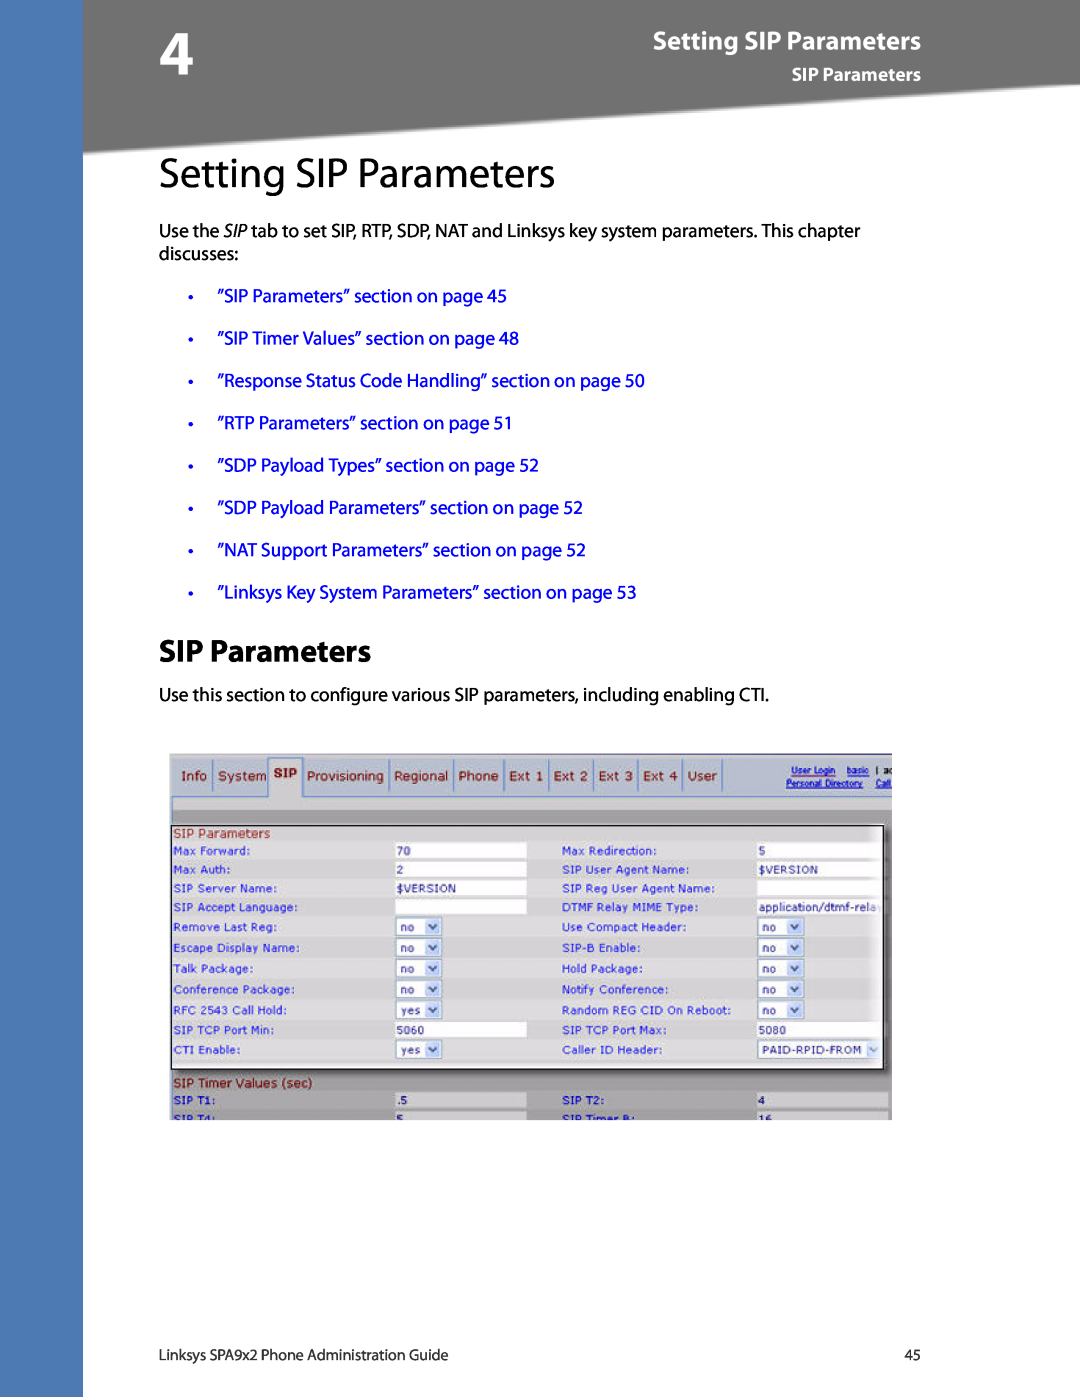 Linksys SPA962, SPA942, SPA932 Setting SIP Parameters, ”SIP Parameters” section on page ”SIP Timer Values” section on page 